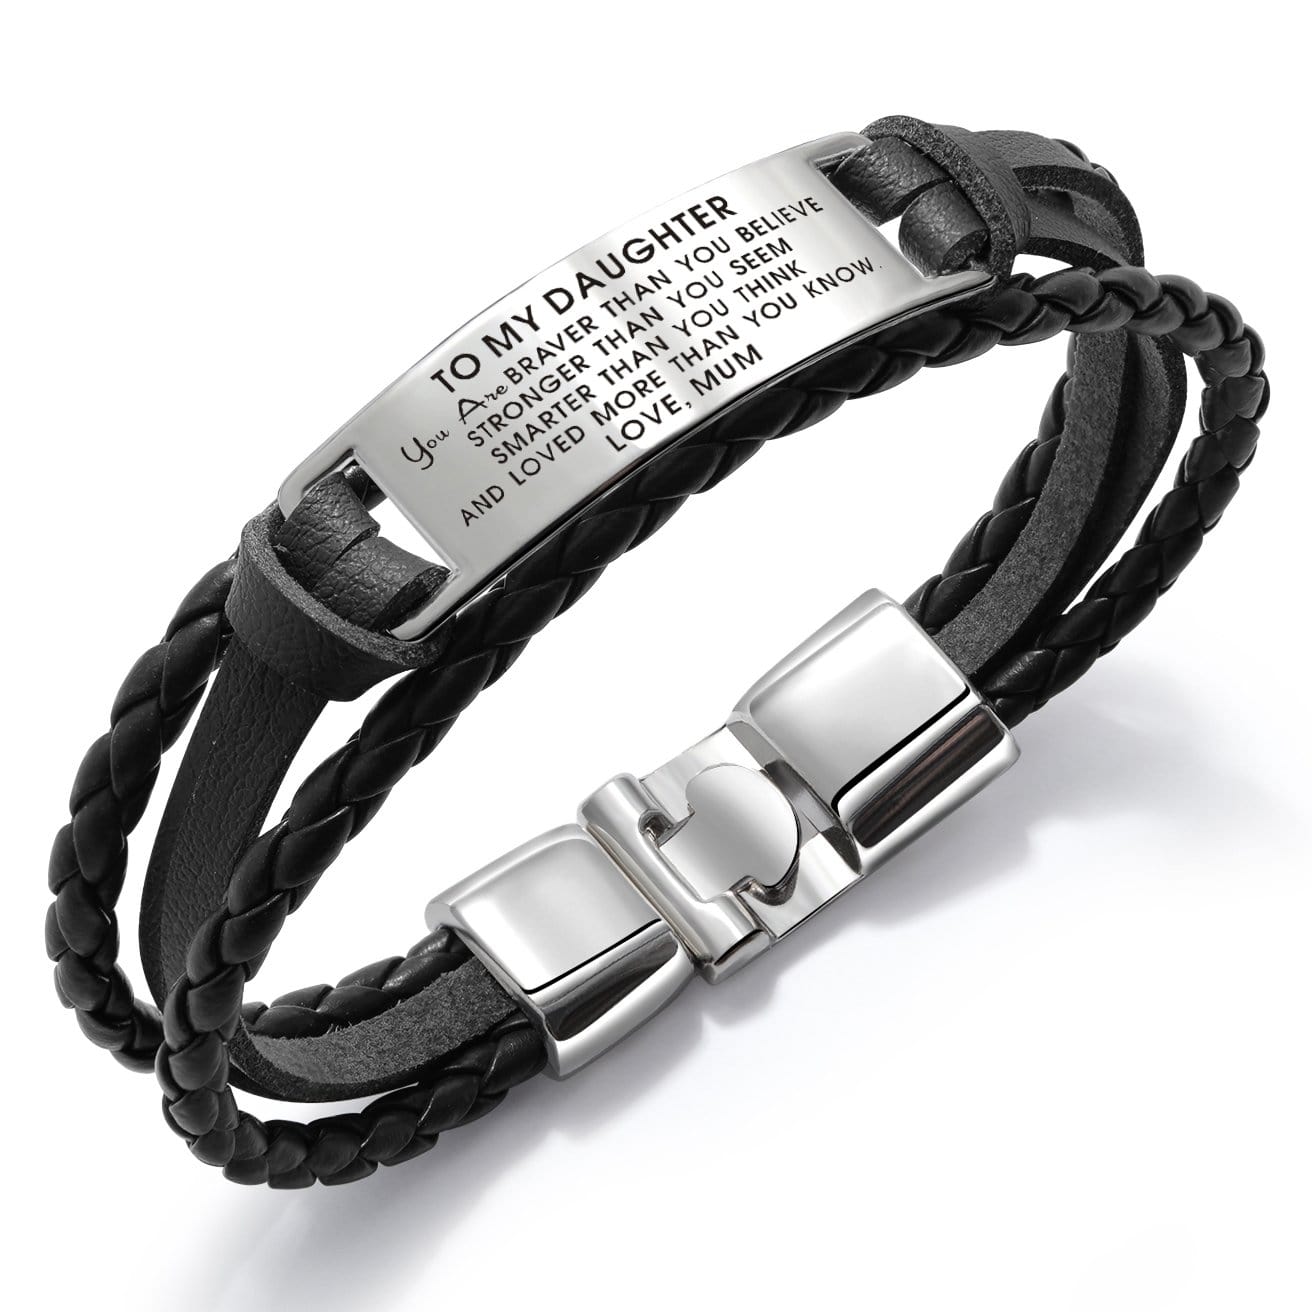 Bracelets For Daughter Mum To Daughter - You Are Loved More Than You Know Leather Bracelet Black GiveMe-Gifts